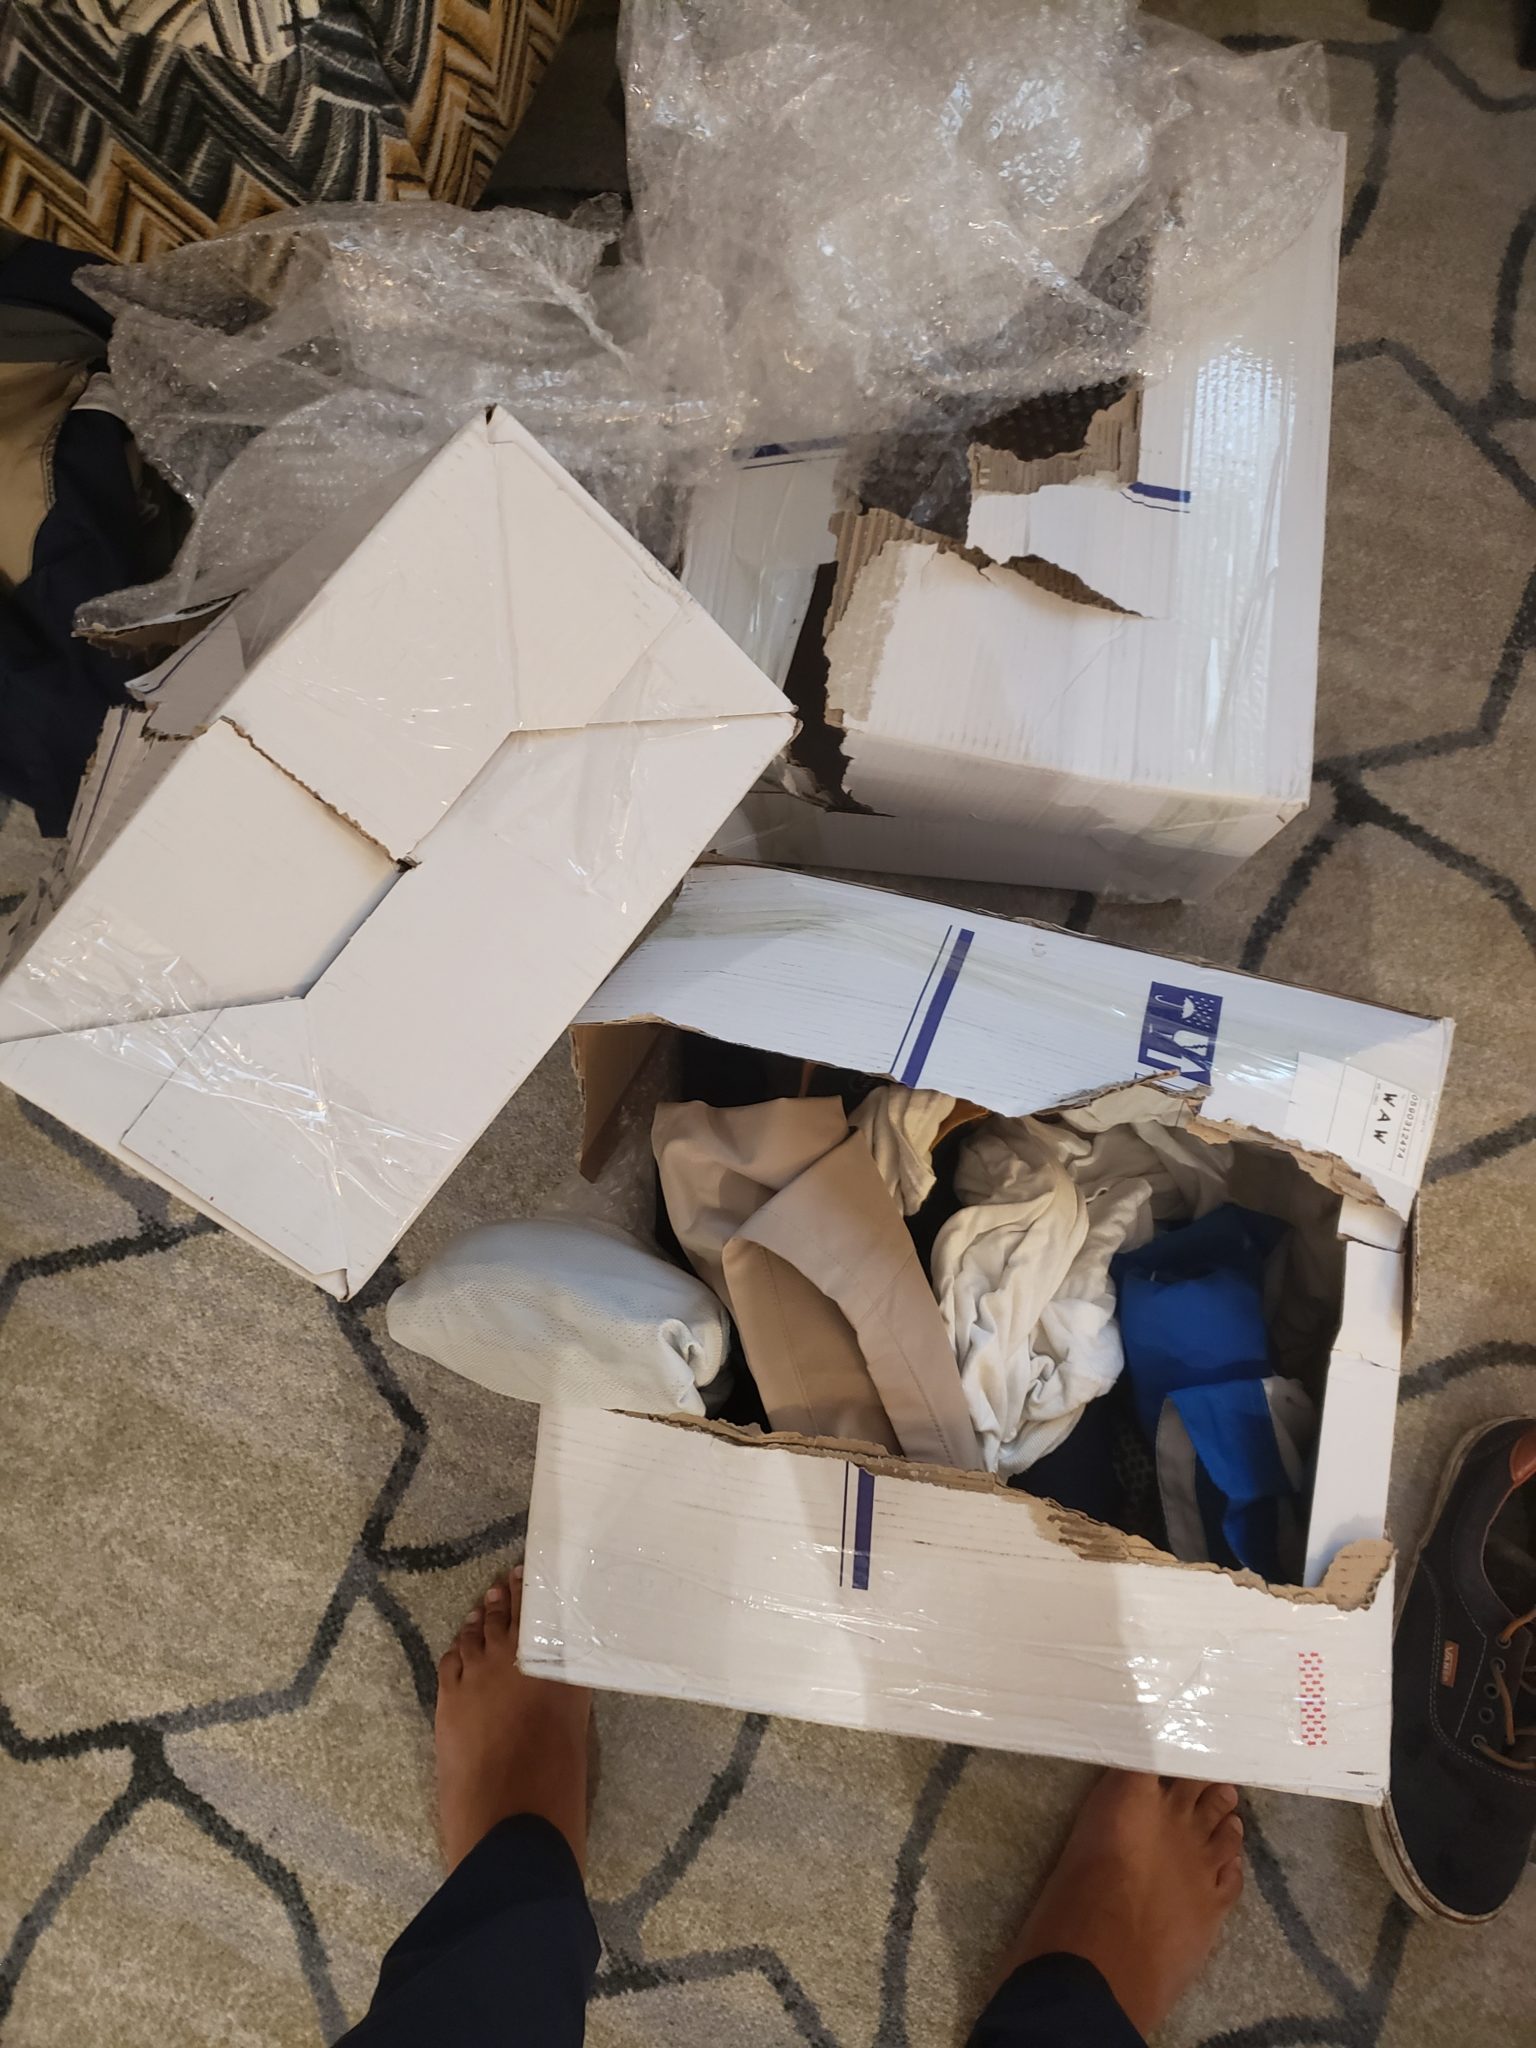 a group of boxes on a carpet